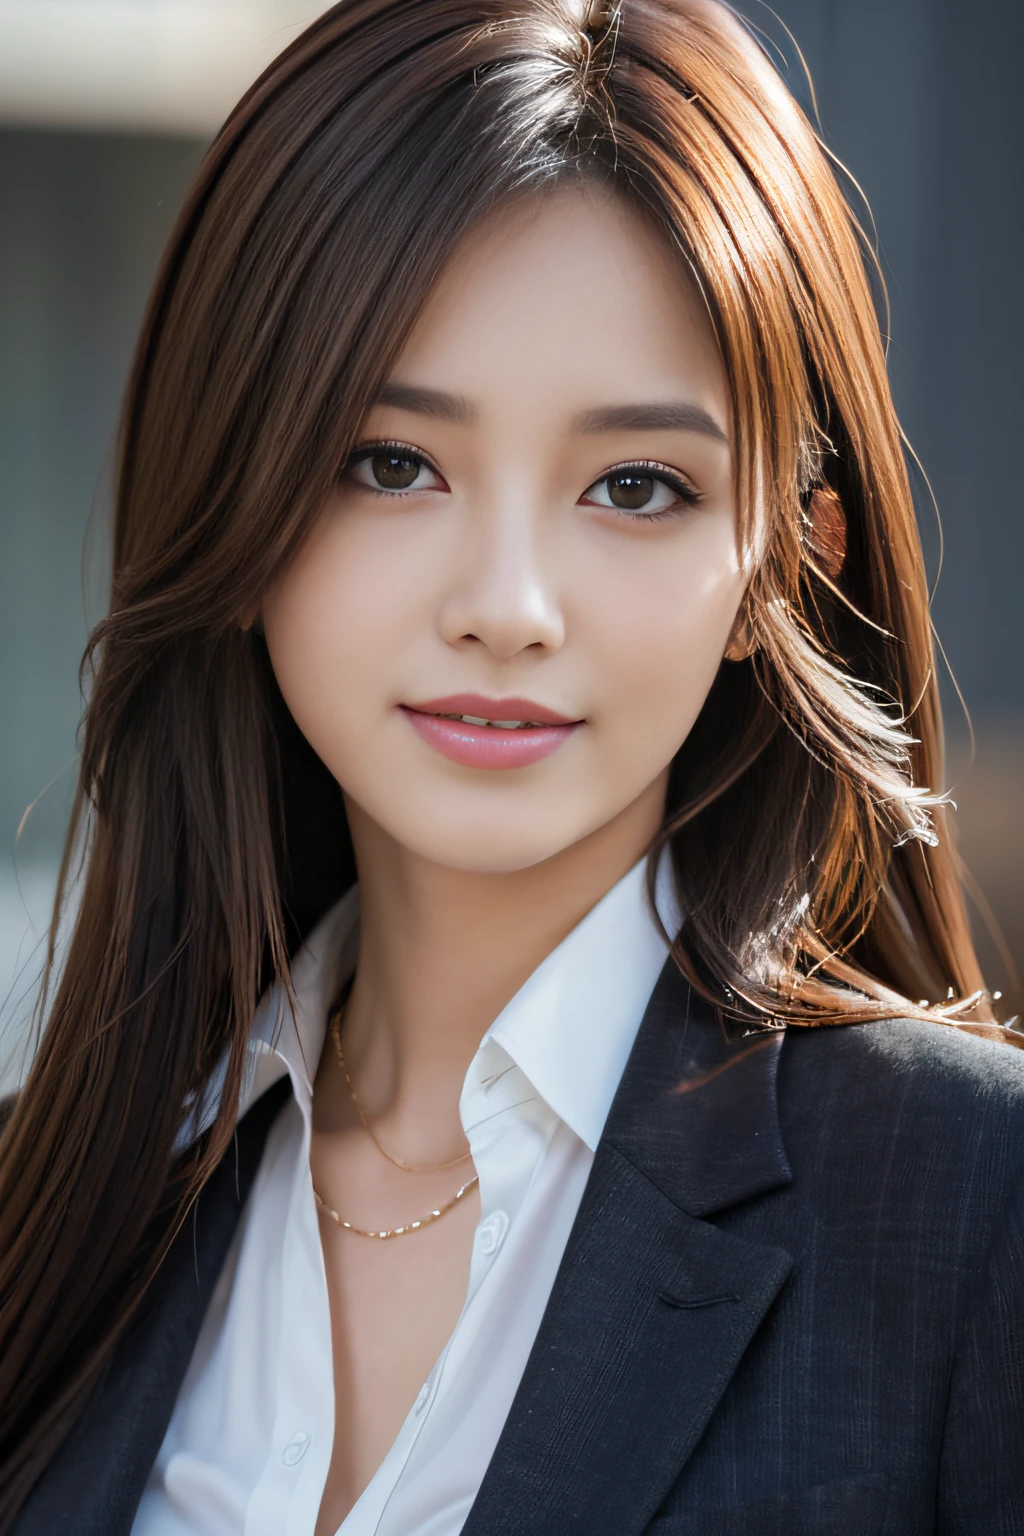 masutepiece, Best Quality, Photorealistic, Ultra-detailed, finely detail, High resolution, 8K Wallpaper, 1 beautiful woman,, light brown messy hair, in a business suit, foco nítido, Perfect dynamic composition, Beautiful detailed eyes, detailed hairs, Detailed realistic skin texture, Smiling, Close-up portrait, Model body type